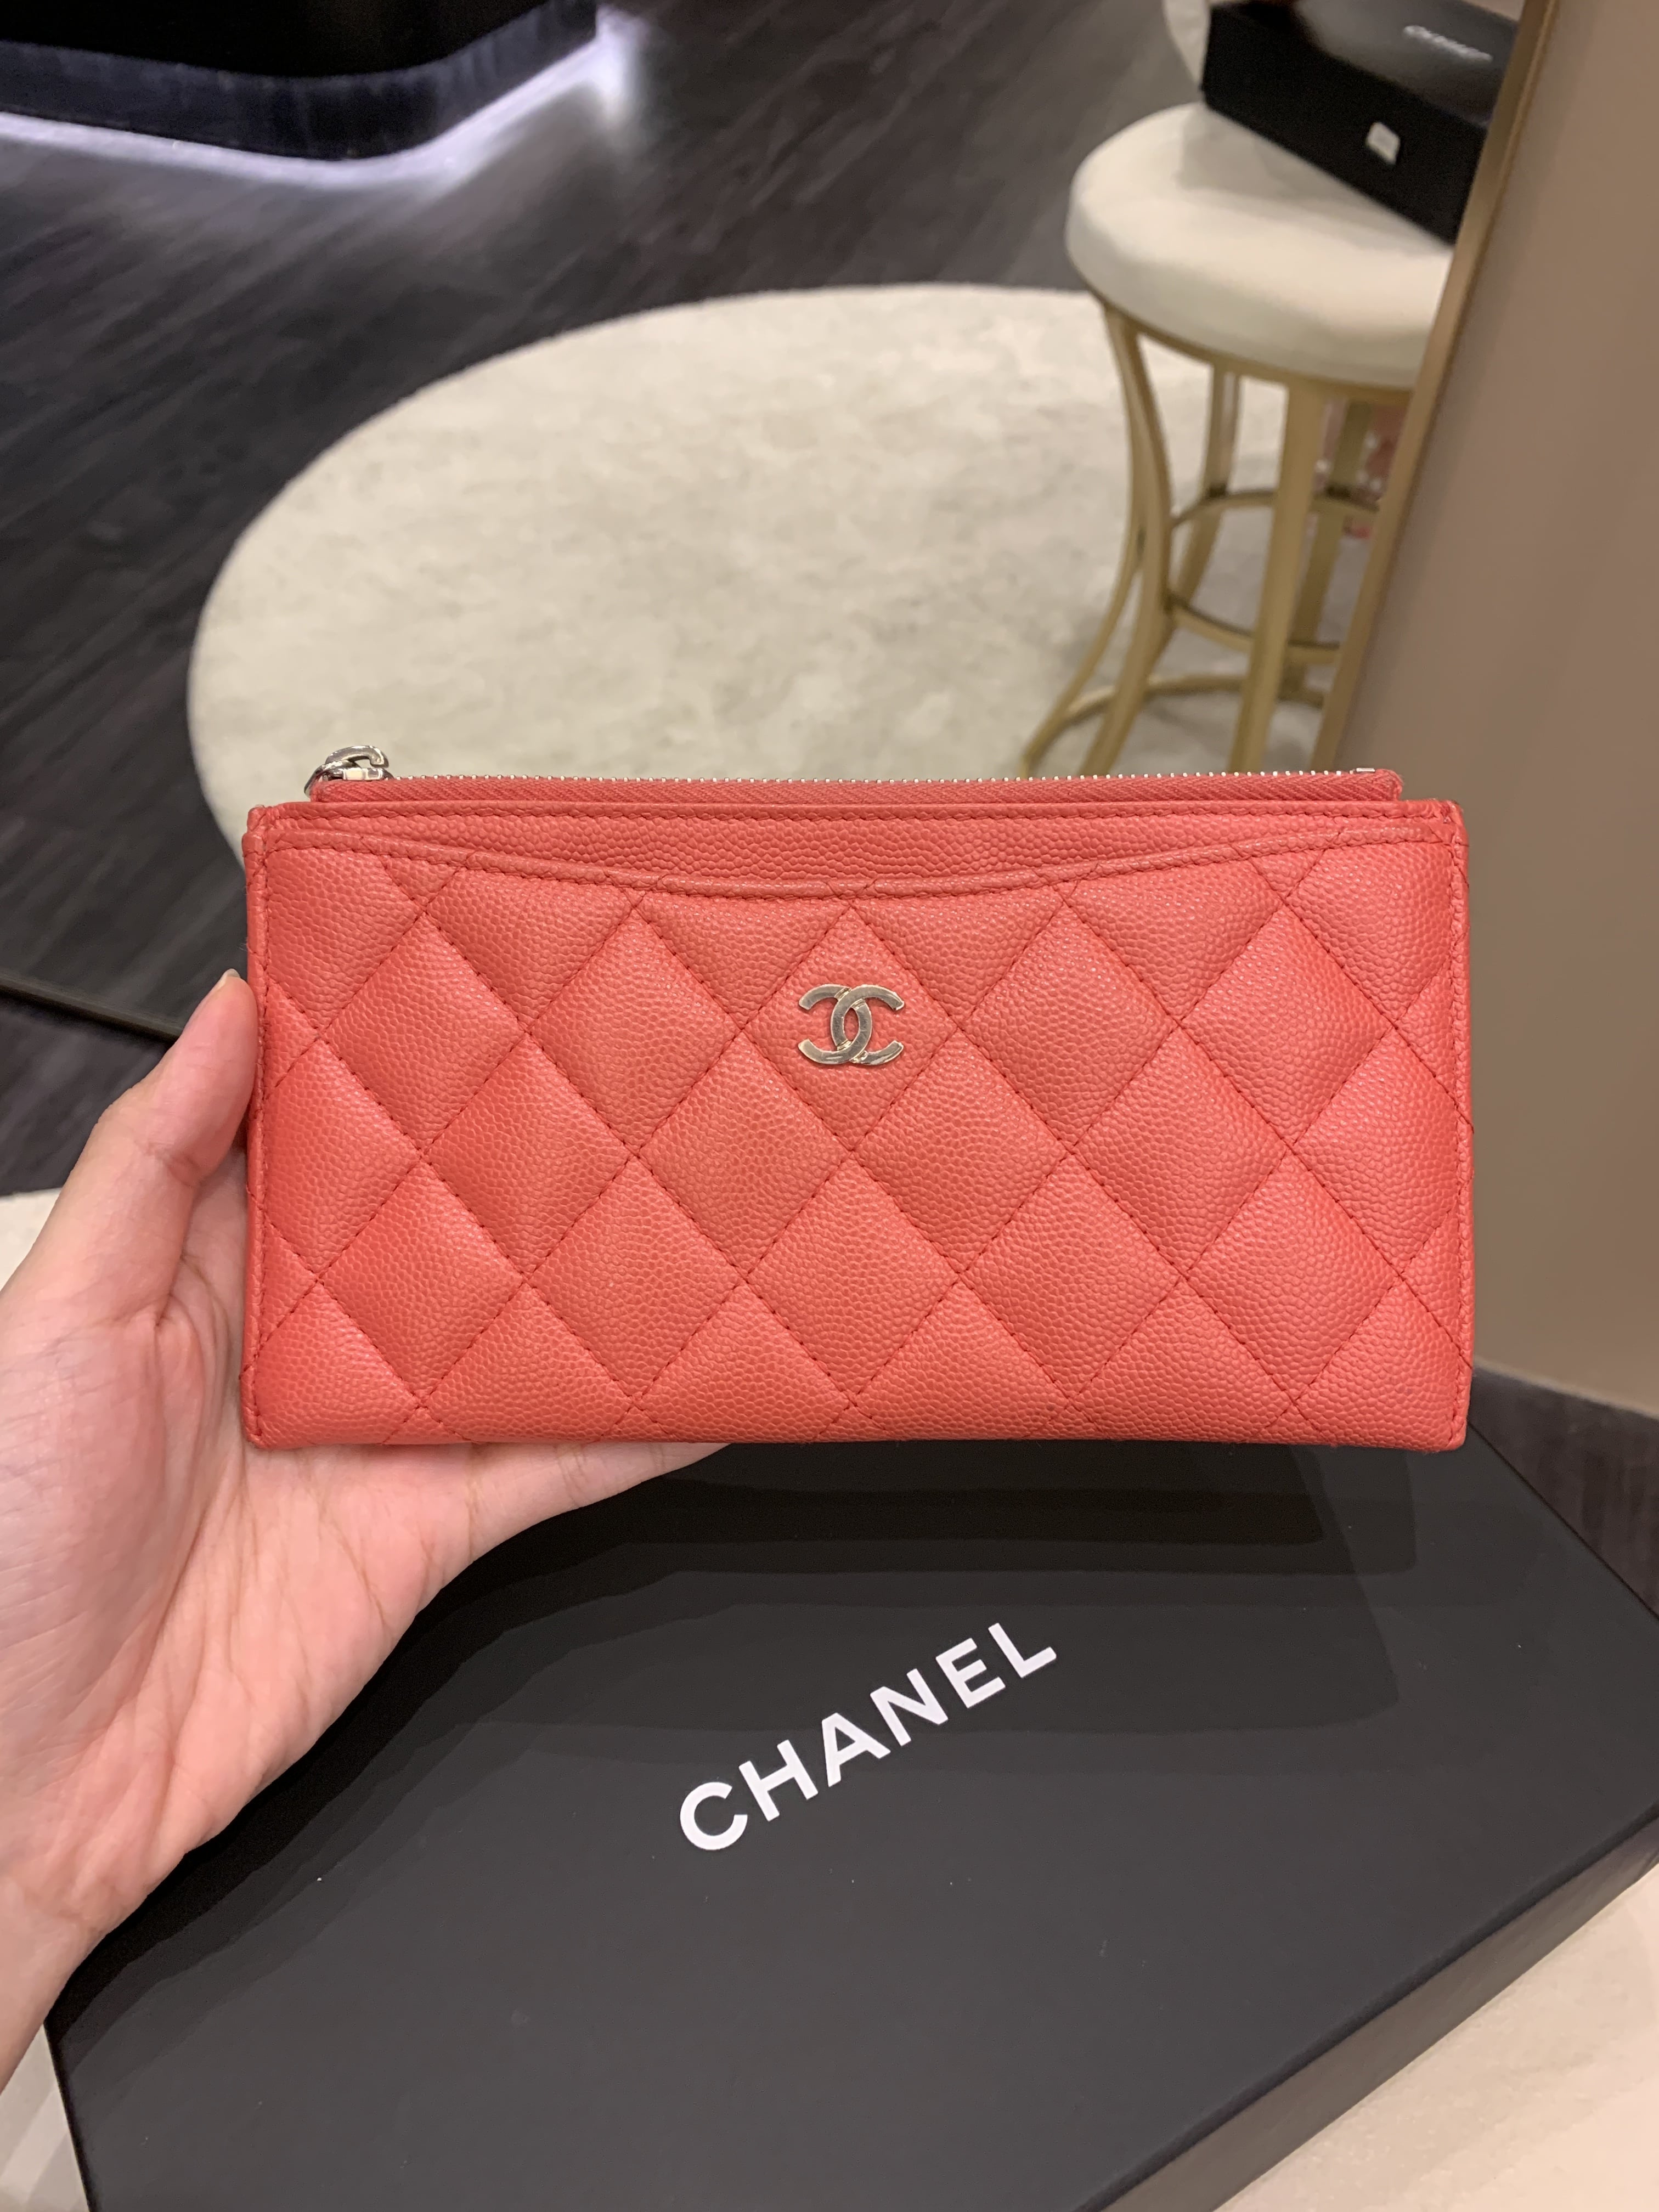 Chanel Quilted Caviar Leather Shopping Tote Bag Dark